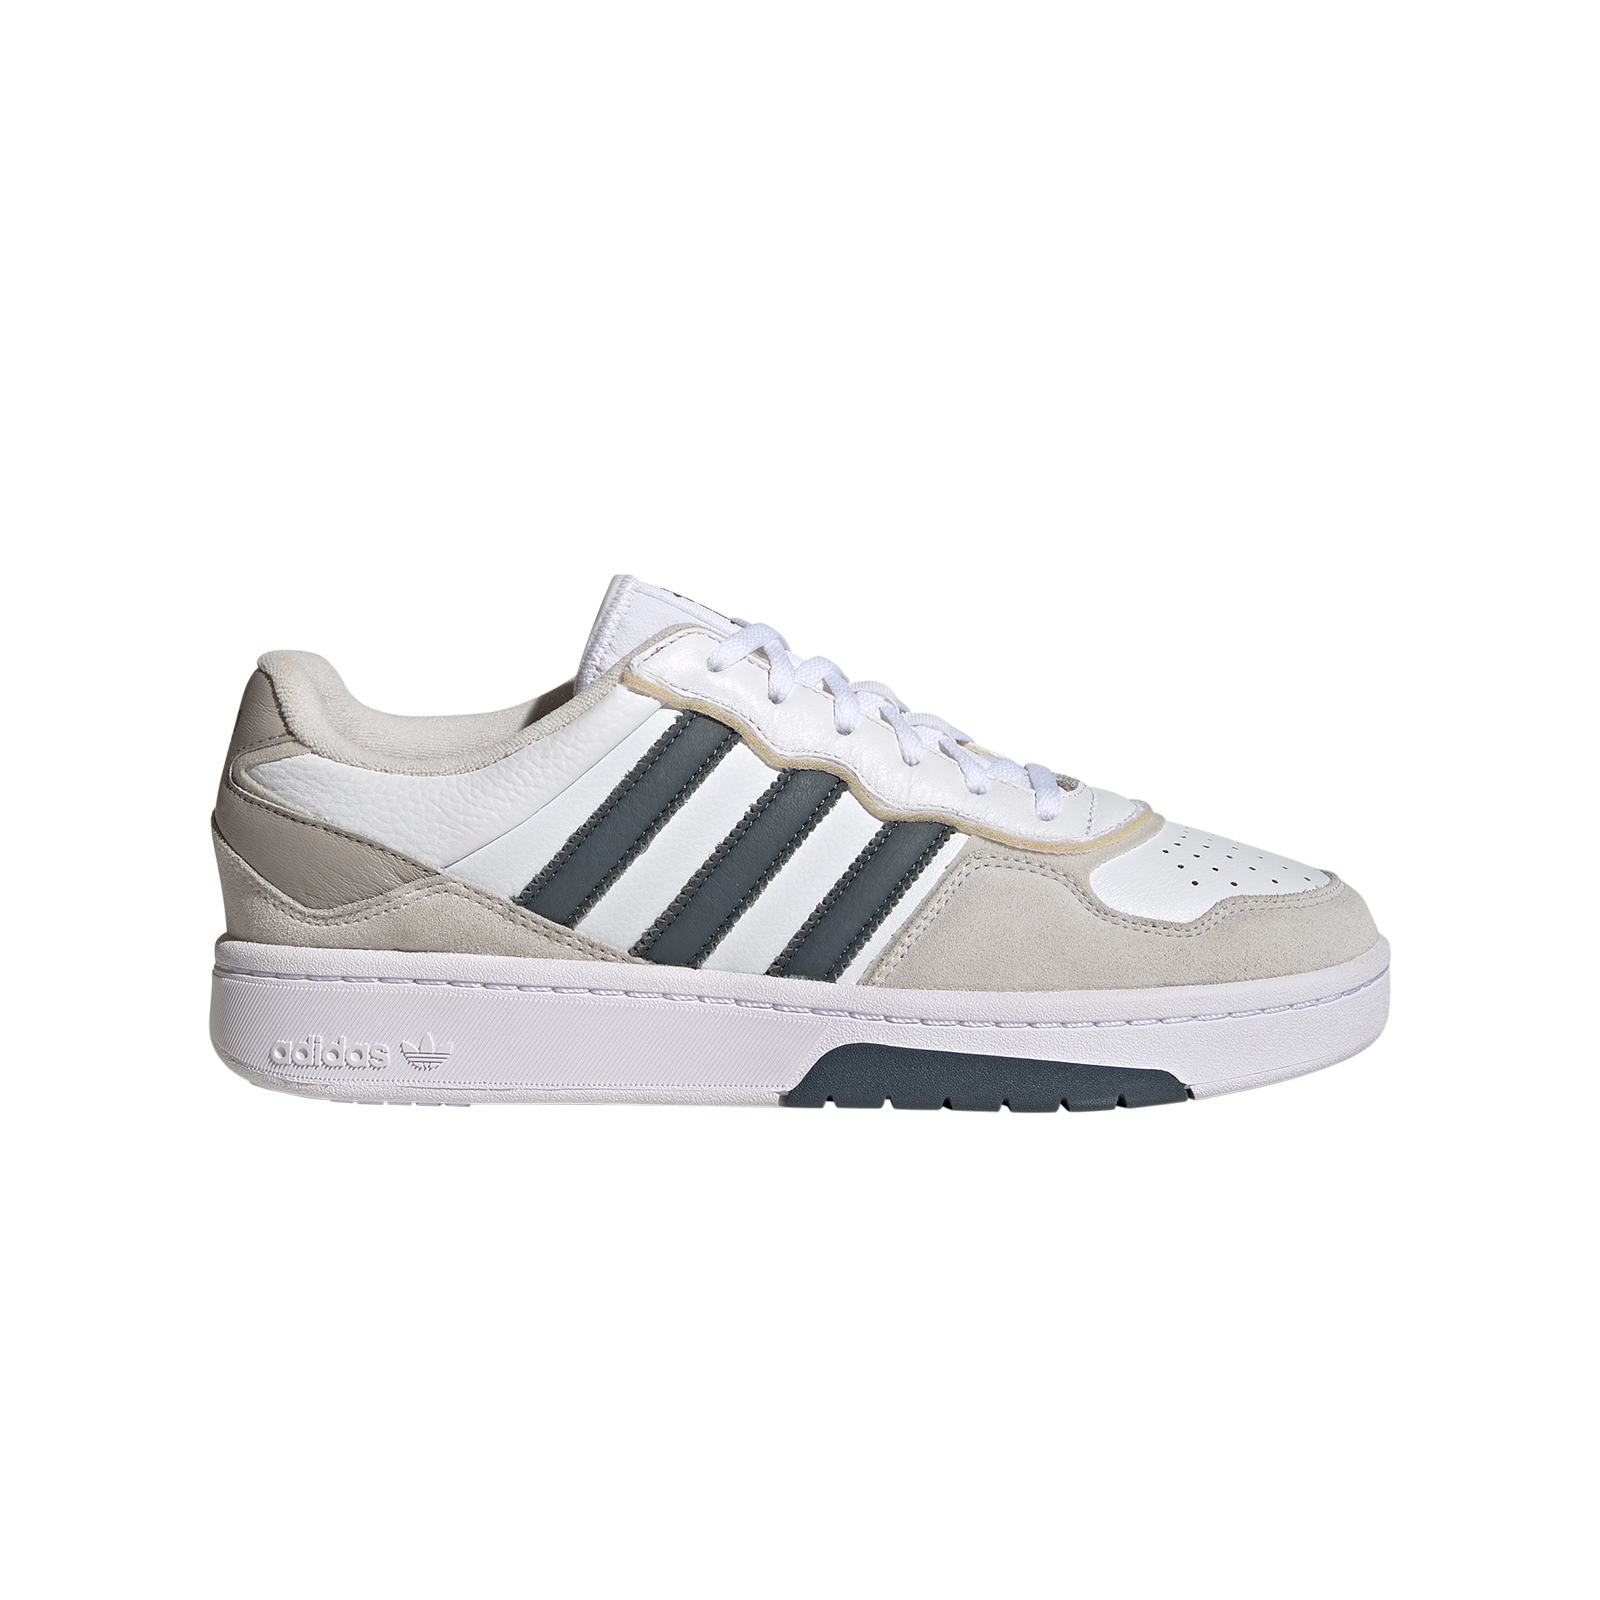 adidas Originals - COURTIC - FTWWHT/GREONE/GREONE Ανδρικά > Παπούτσια > Sneaker > Παπούτσι Low Cut